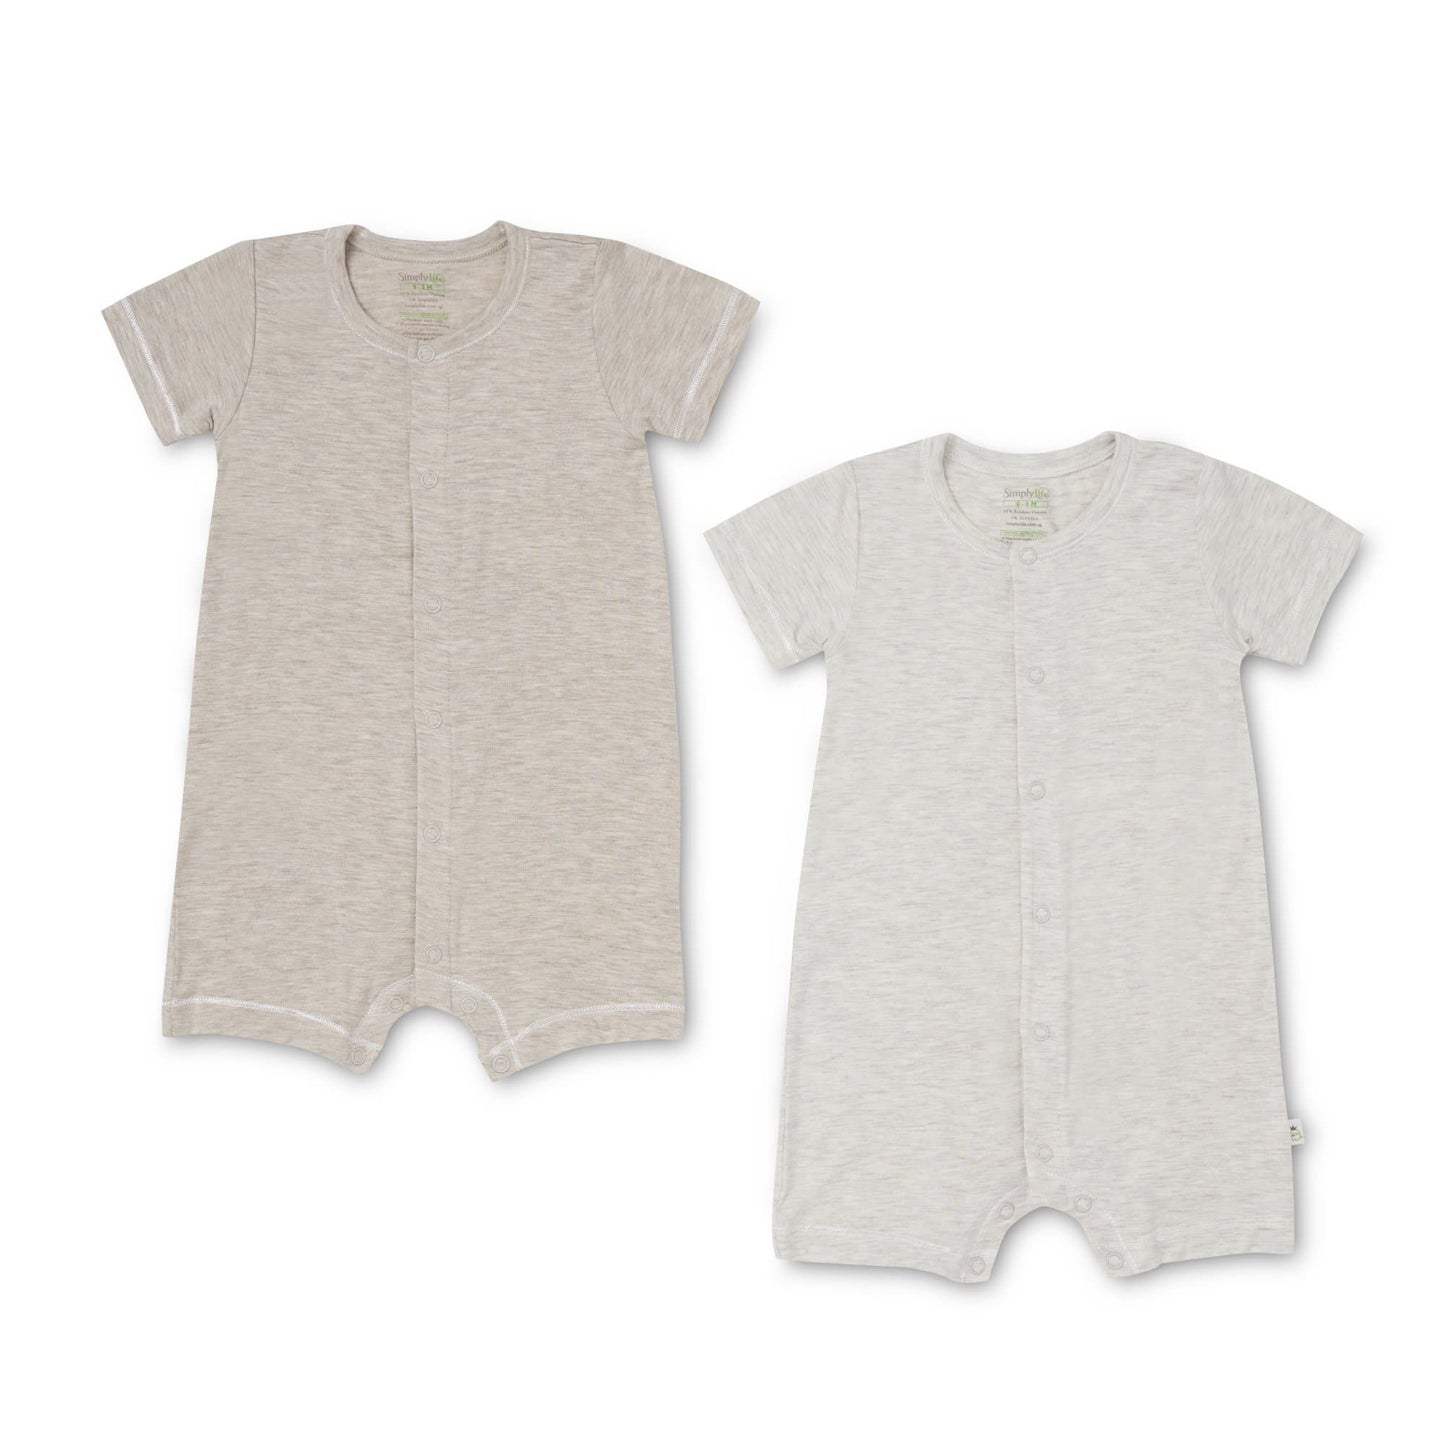 Sandwash Khaki and Grey - Short-sleeved Shortall with Front Snap Buttons (Value Pack of 2)